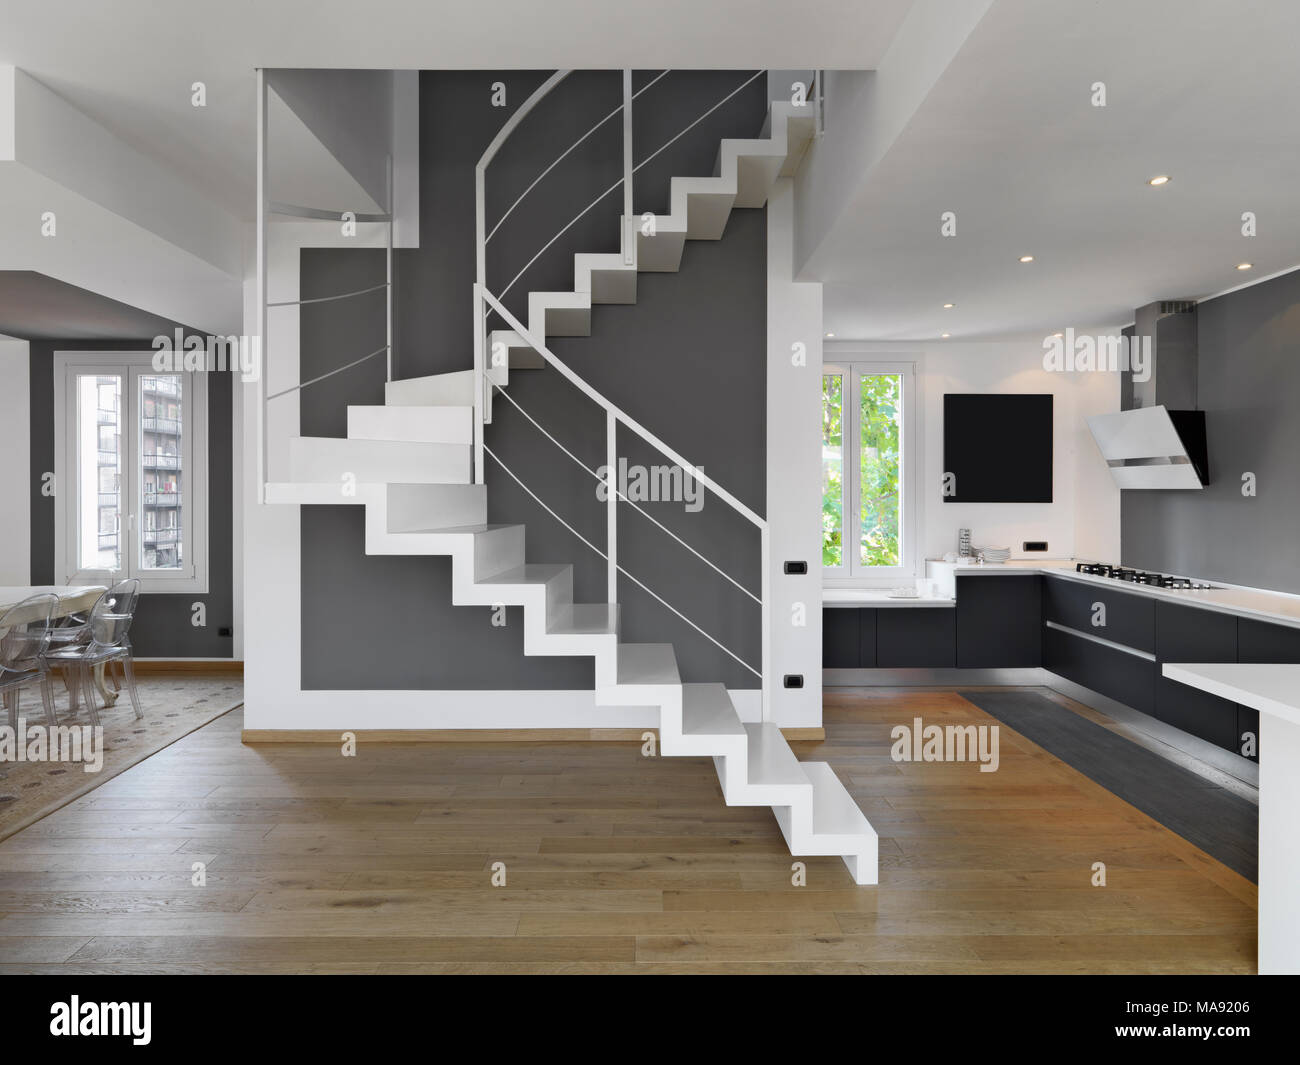 interior shots of a modern apartment overlooking on the kitchen and the dining room in foreground the staircase wjose floor is made of wood Stock Photo